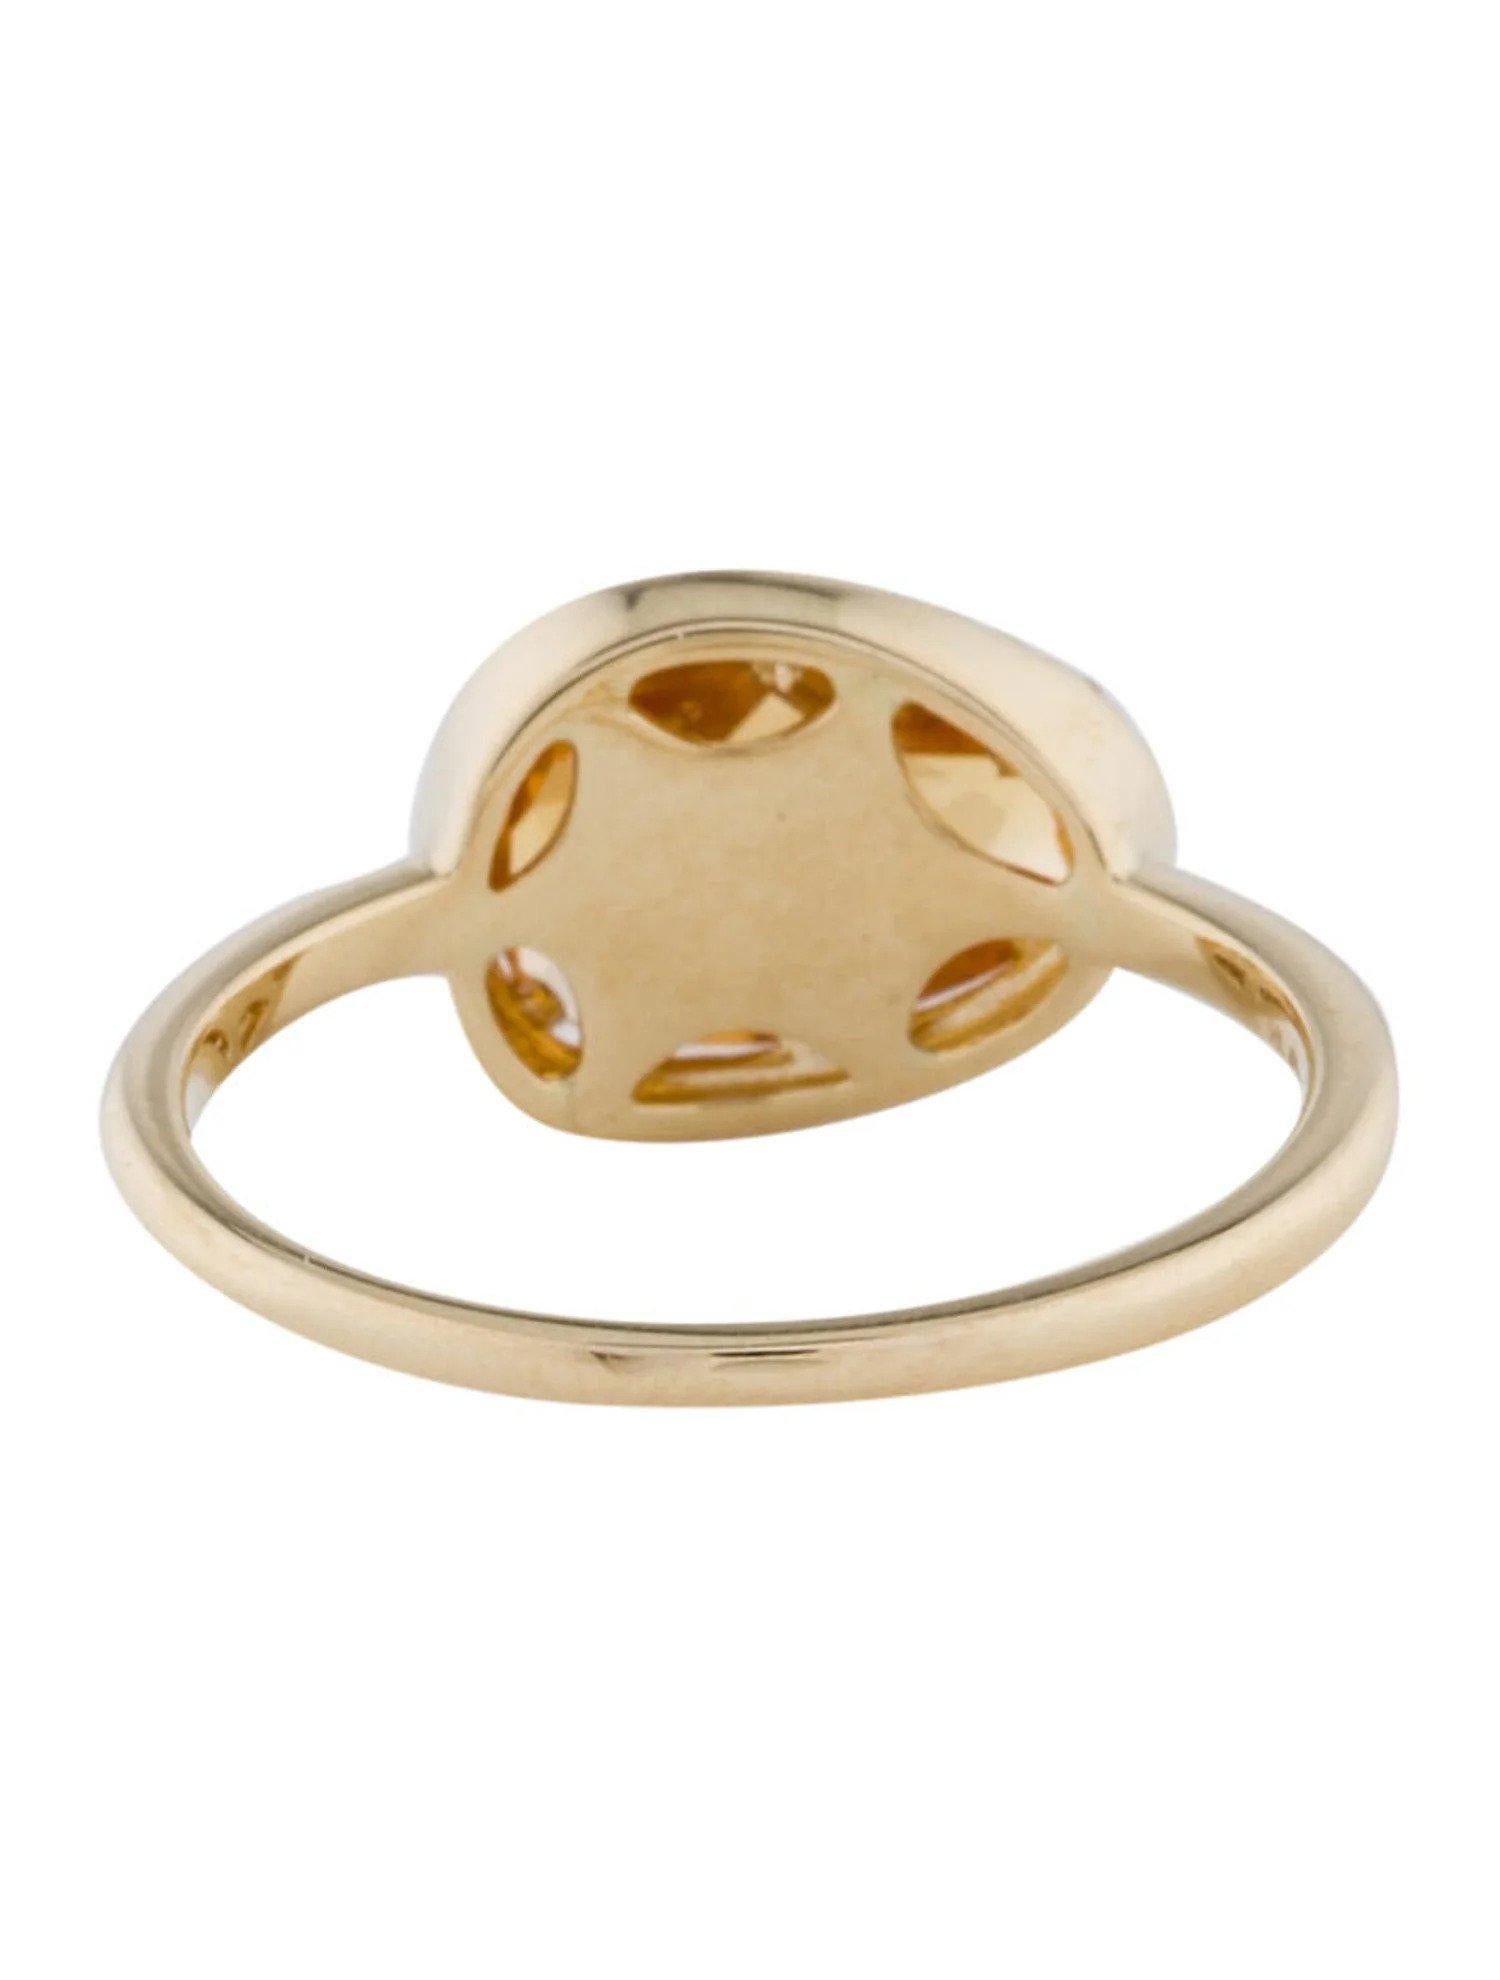 2.03 Carat Citrine & Diamond Yellow Gold Ring In New Condition For Sale In Great Neck, NY